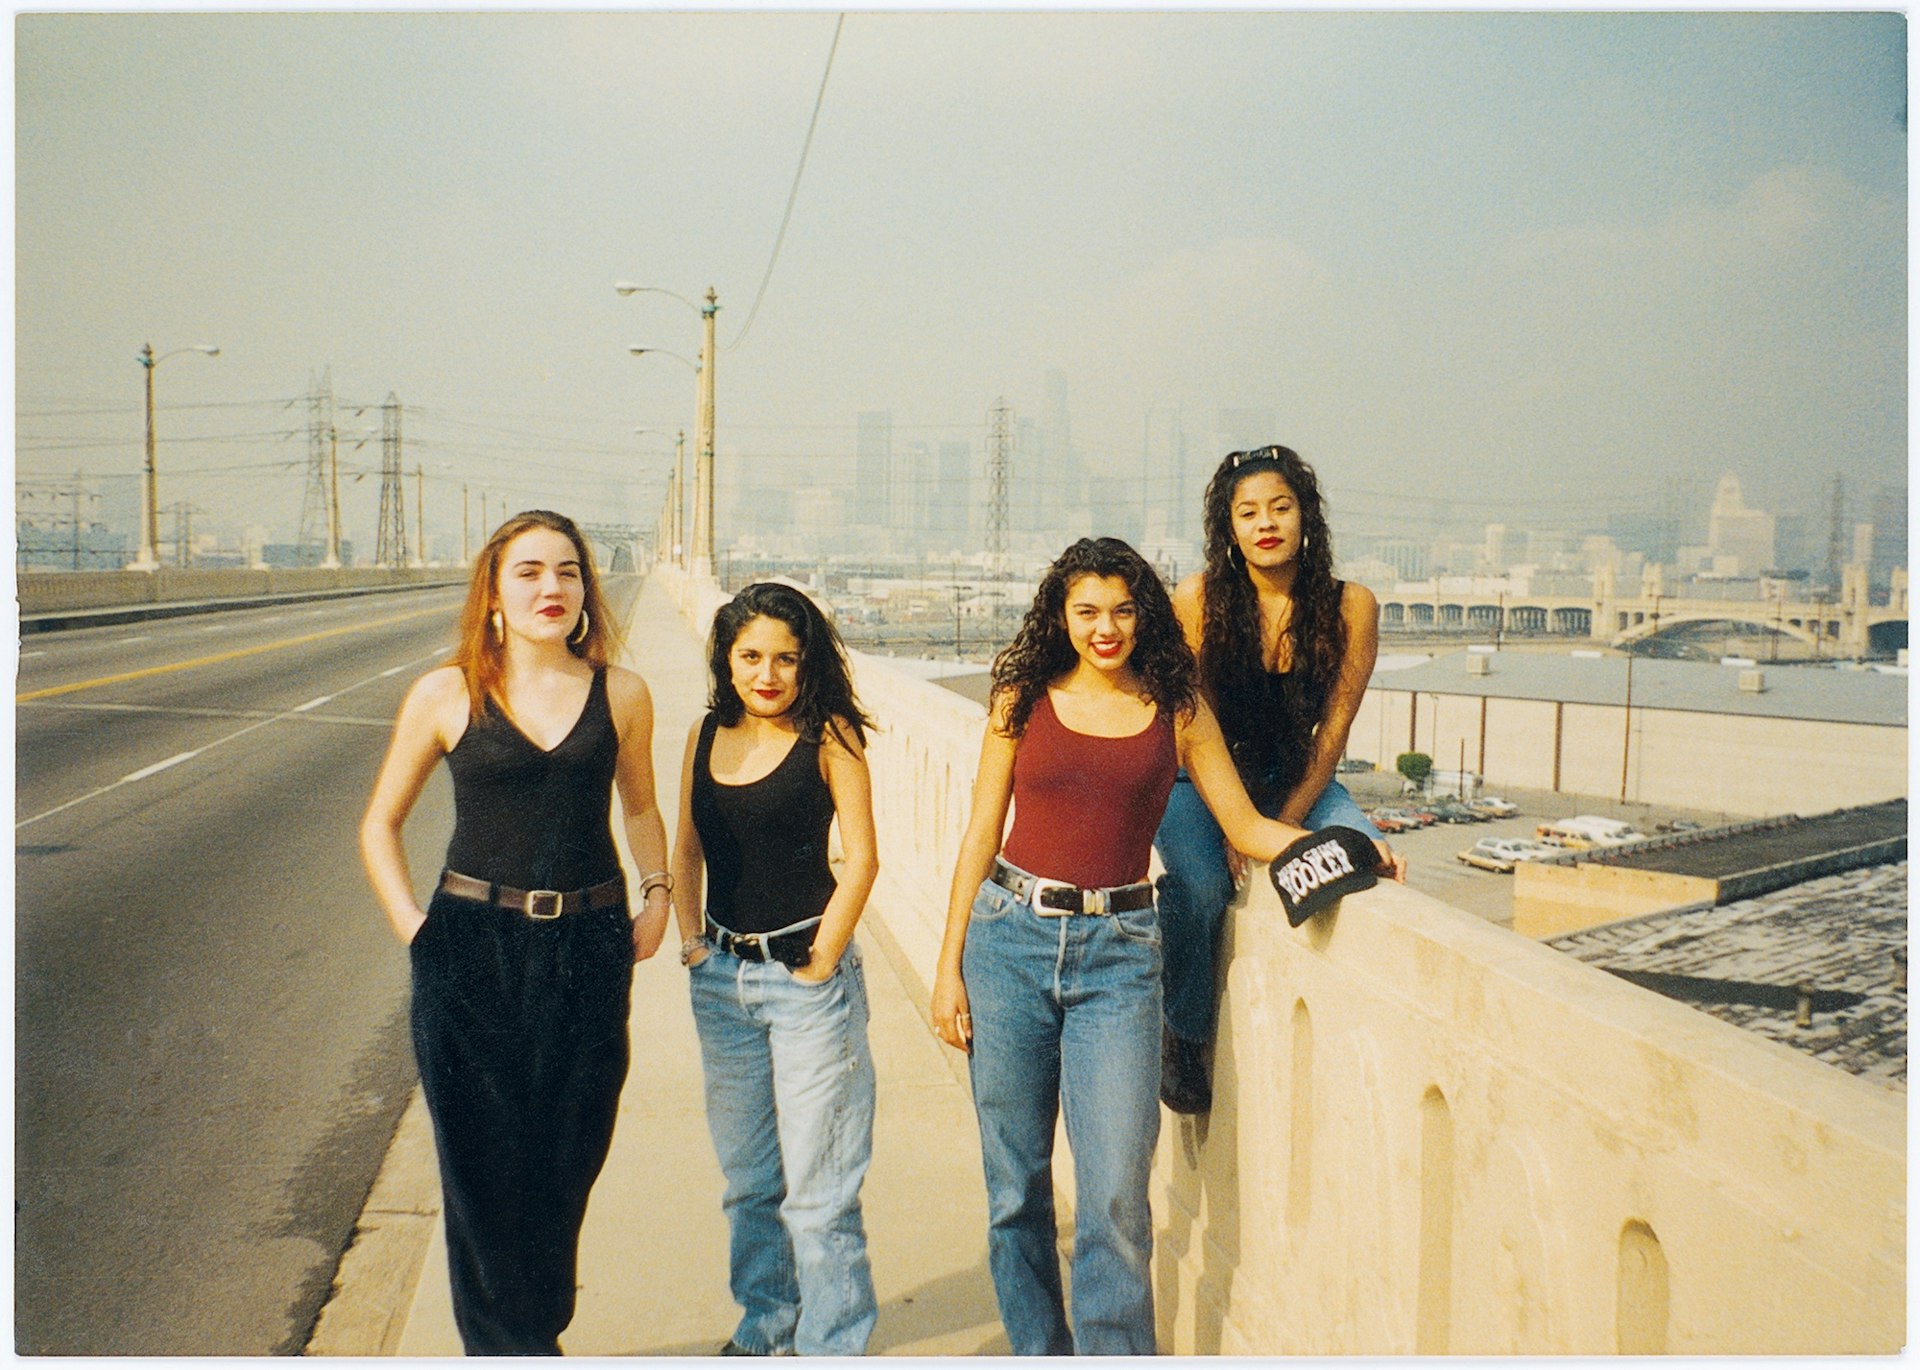 A photographic history of East LA in the 90s